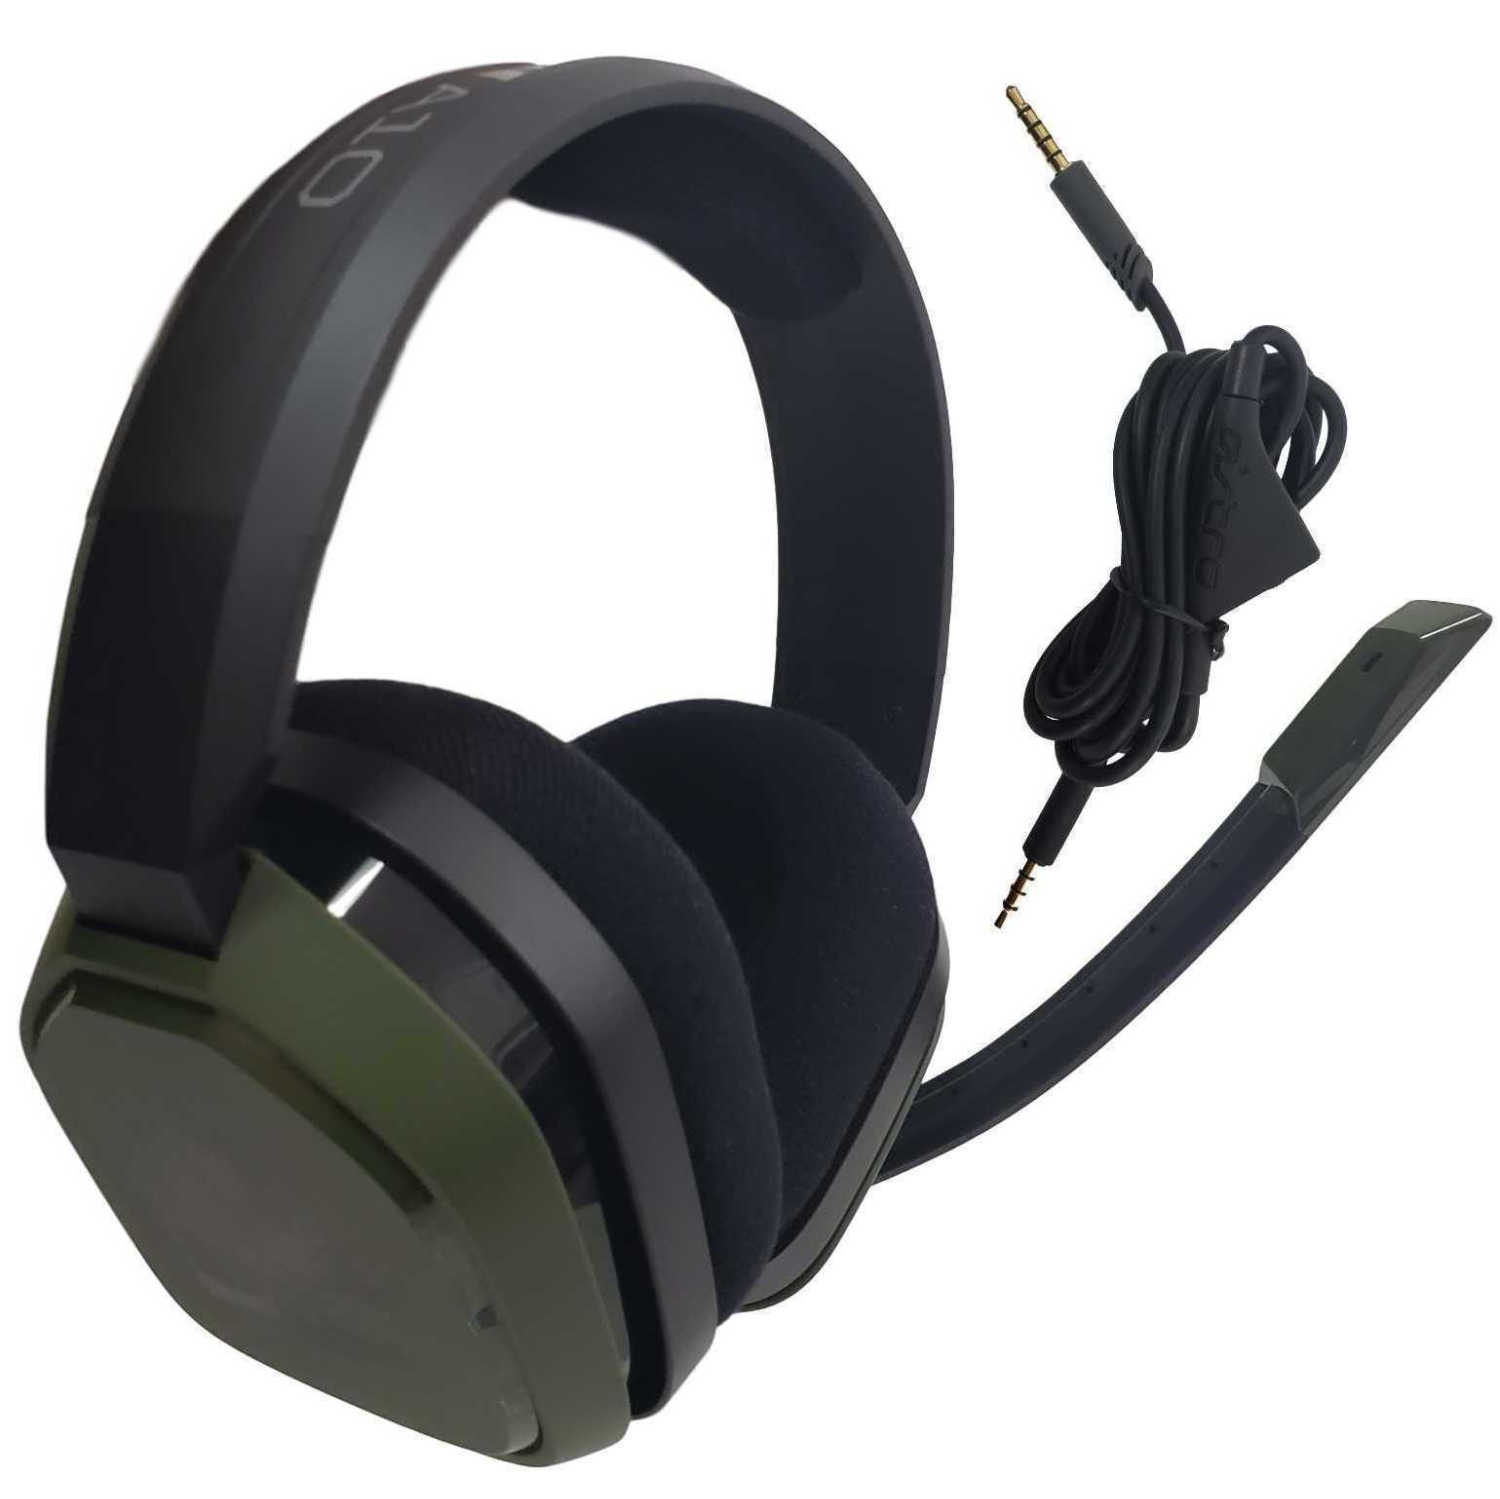 Refurbished (Excellent) - Logitech Astro A10 Call Of Duty Wired Gaming Headset 939-001507 Green/Black - Certified Refurbished